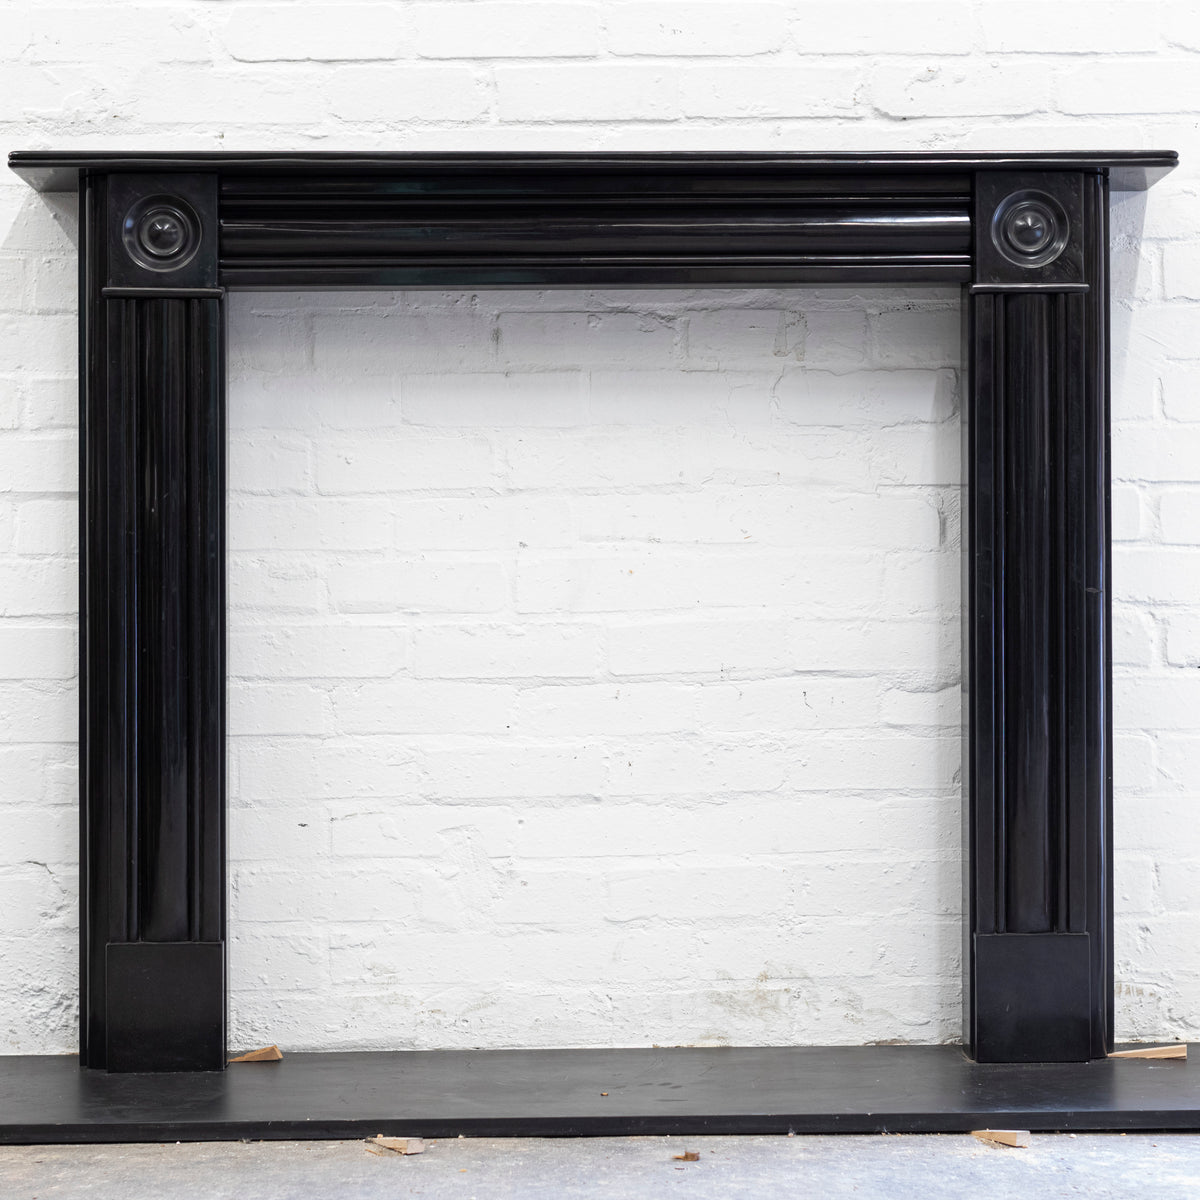 Reclaimed Early Georgian Style Belgian Black Marble Fire Surround | The Architectural Forum